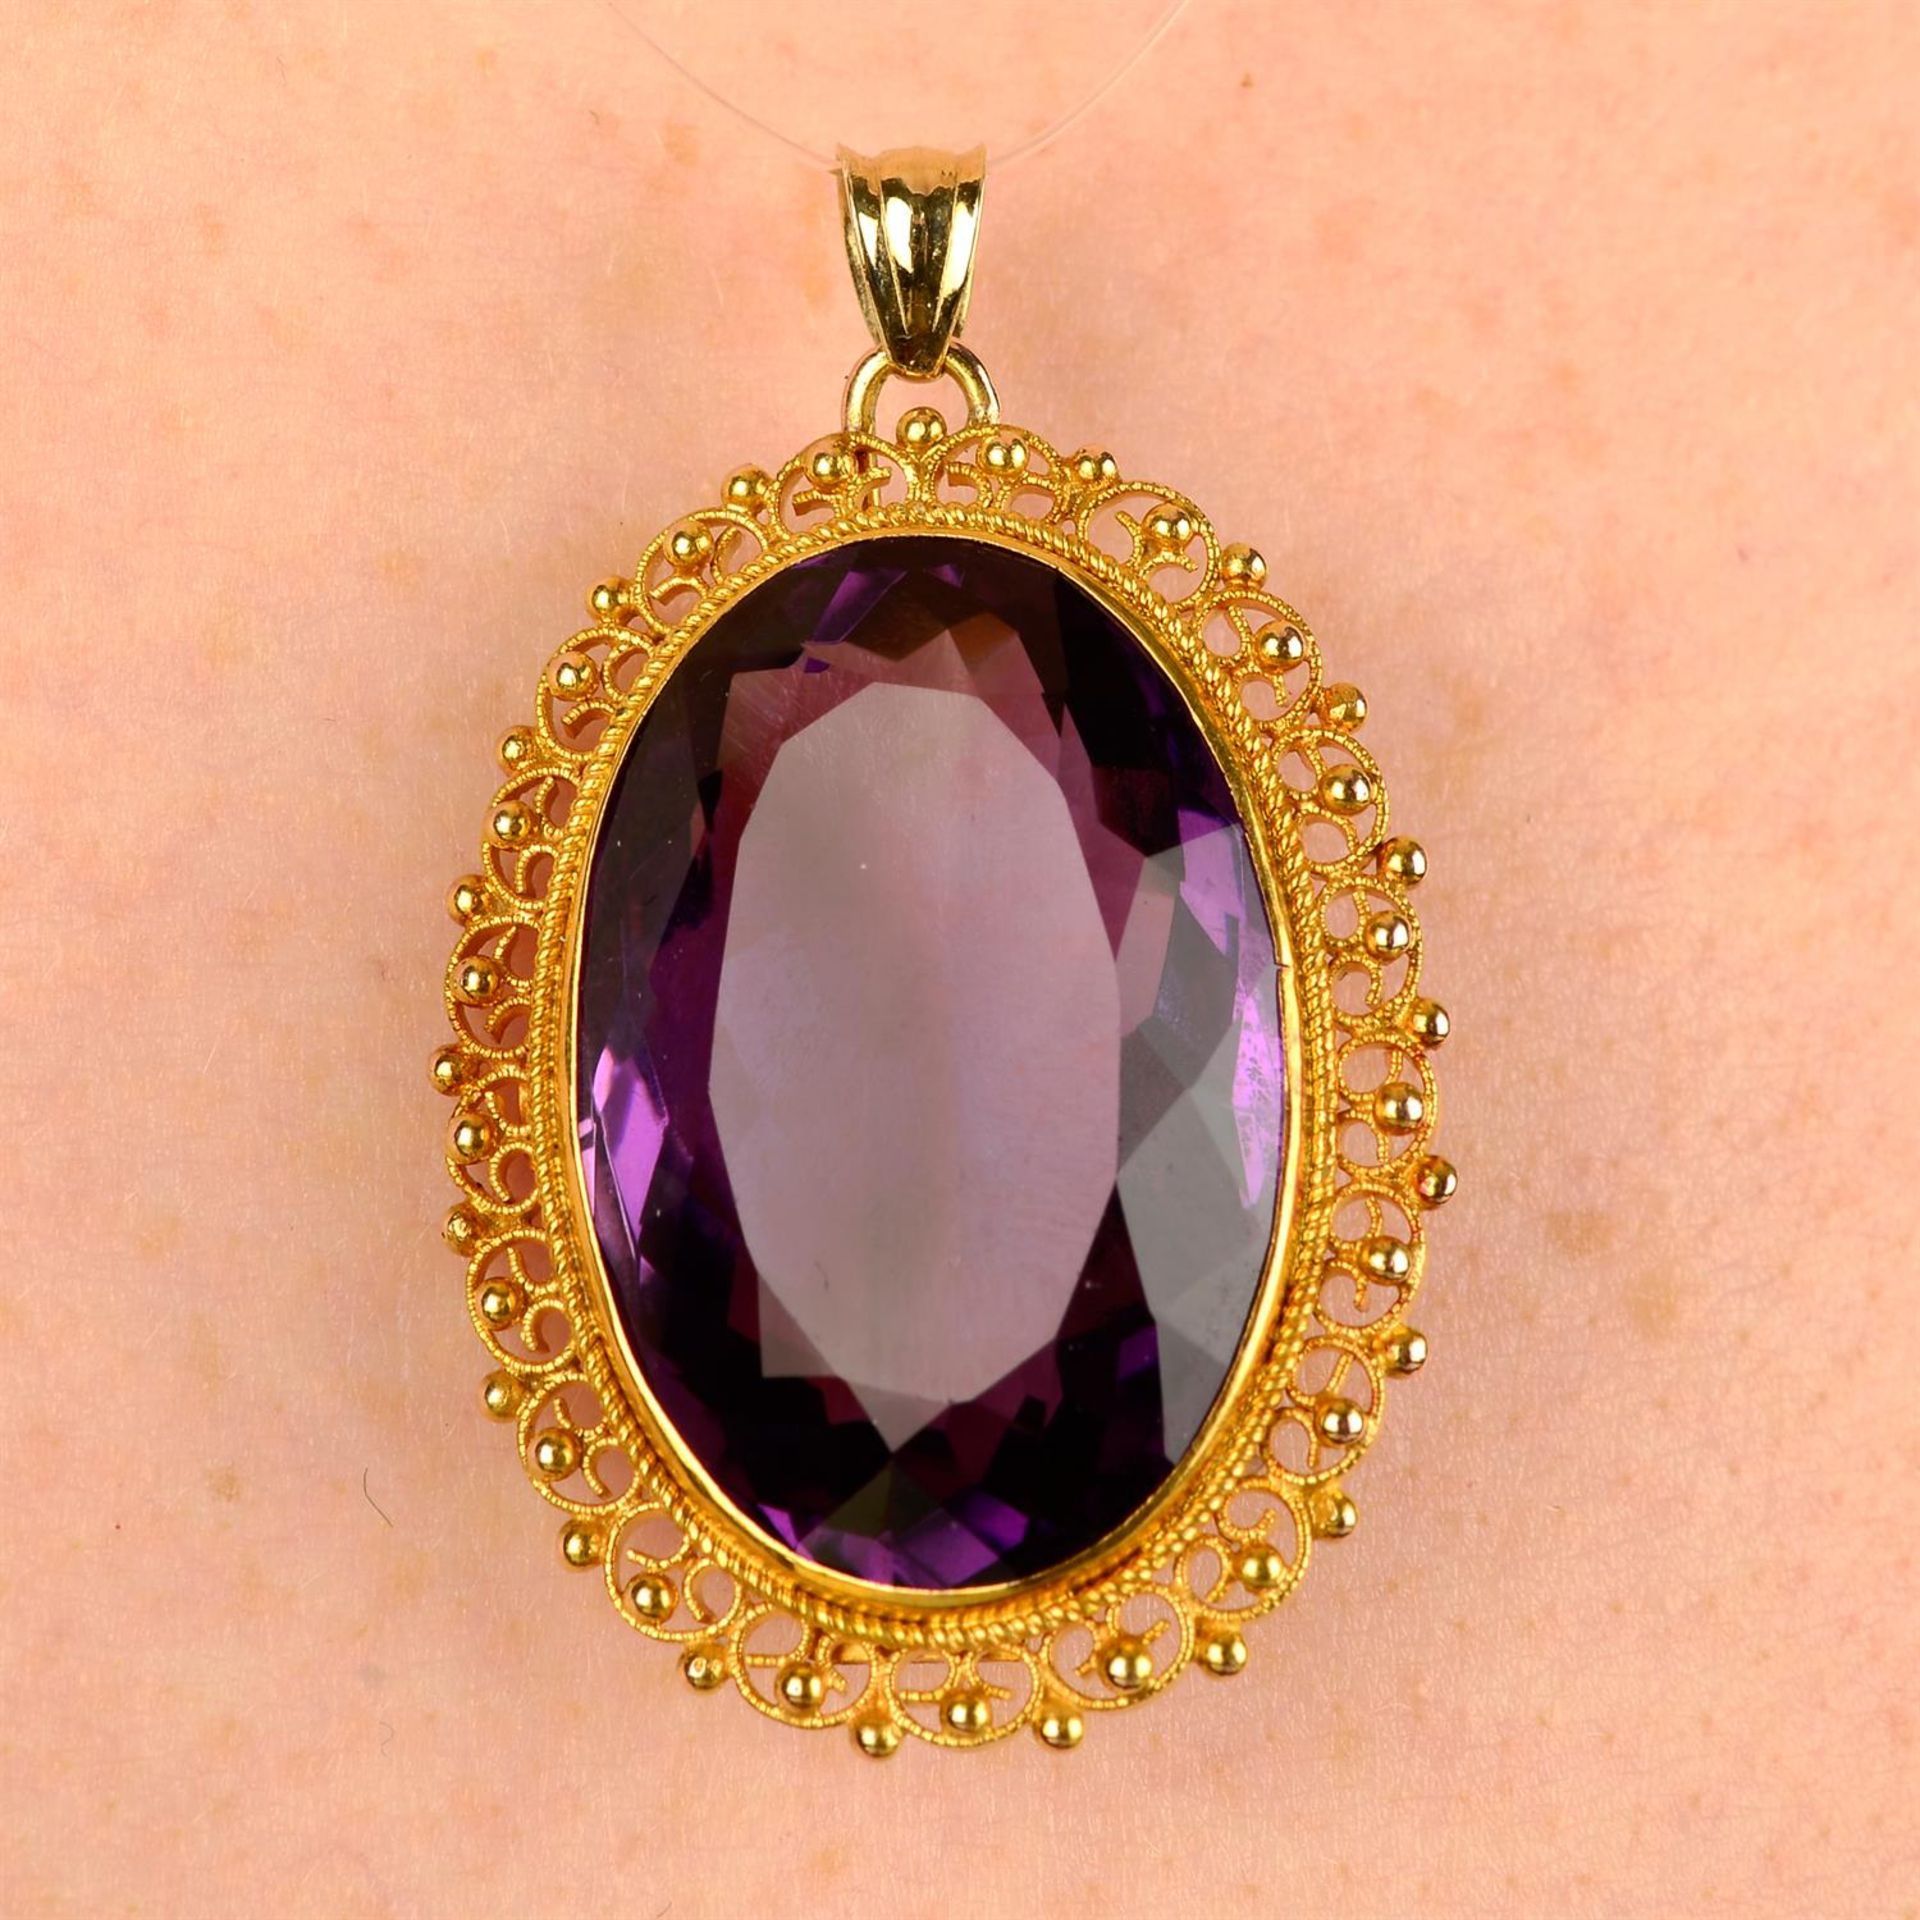 An early 20th century 14ct gold amethyst pendant.